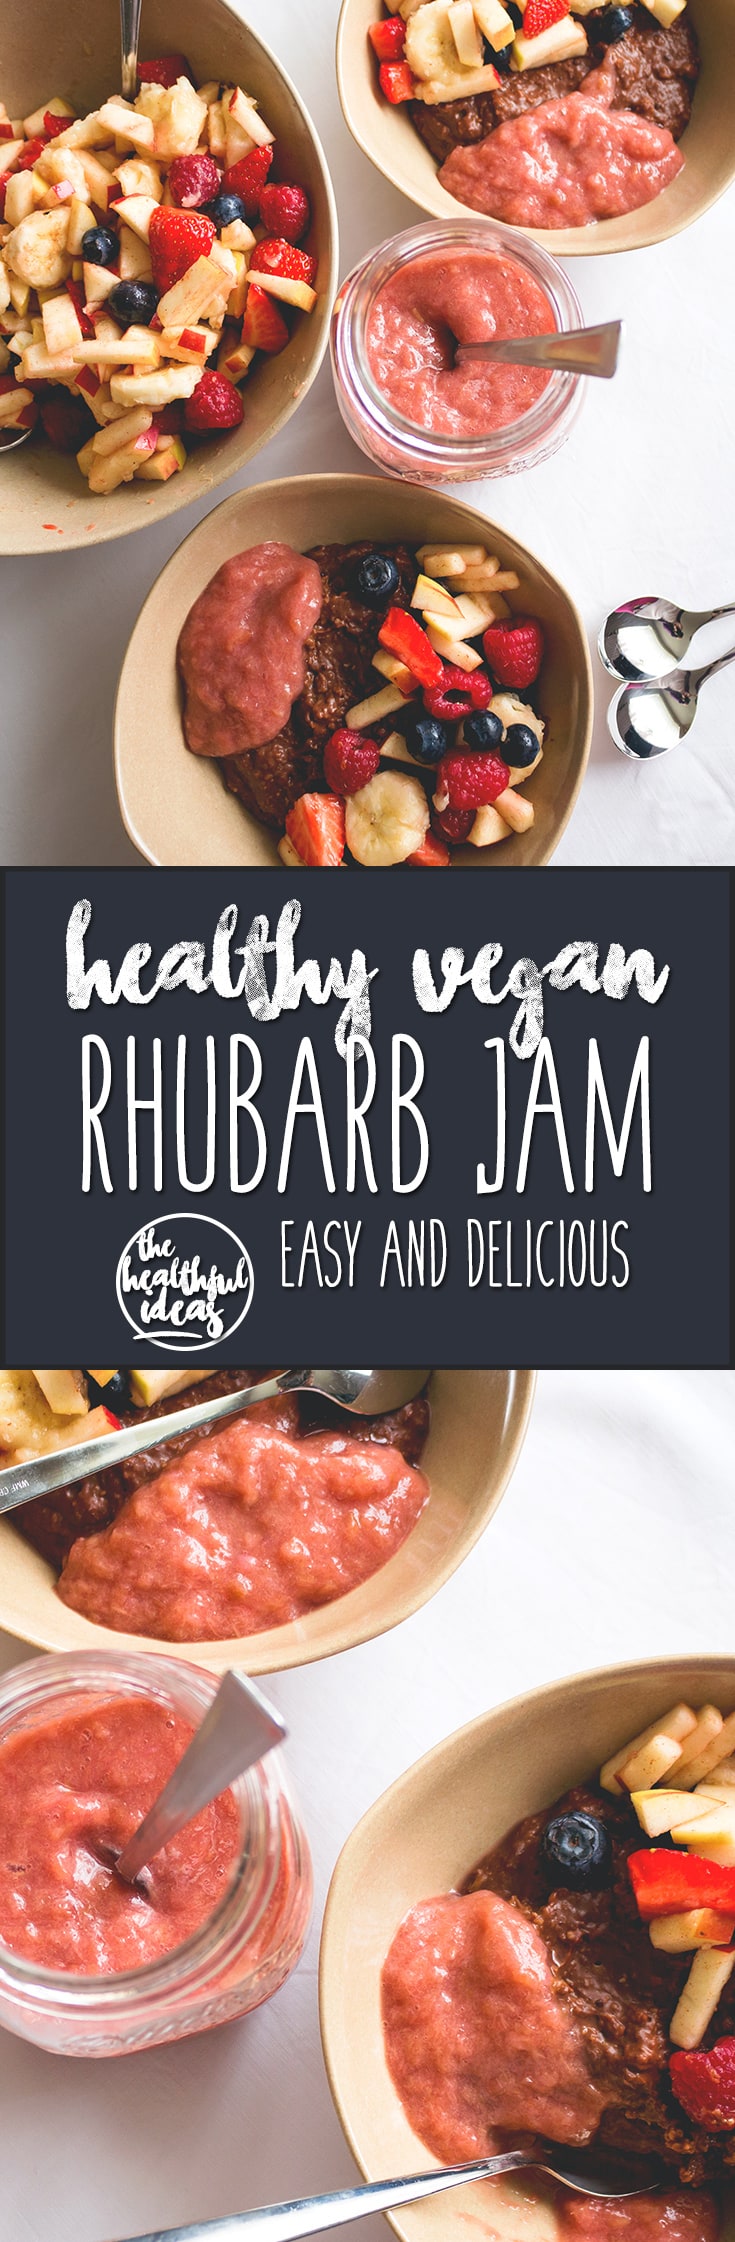 Rhubarb Jam - easy and delicious jam that happens to be good for you. Only 2 ingredients! I like to eat it with ice cream, oatmeal, or smoothies. Vegan, gluten-free, and processed sugar-free! | thehealthfulideas.com